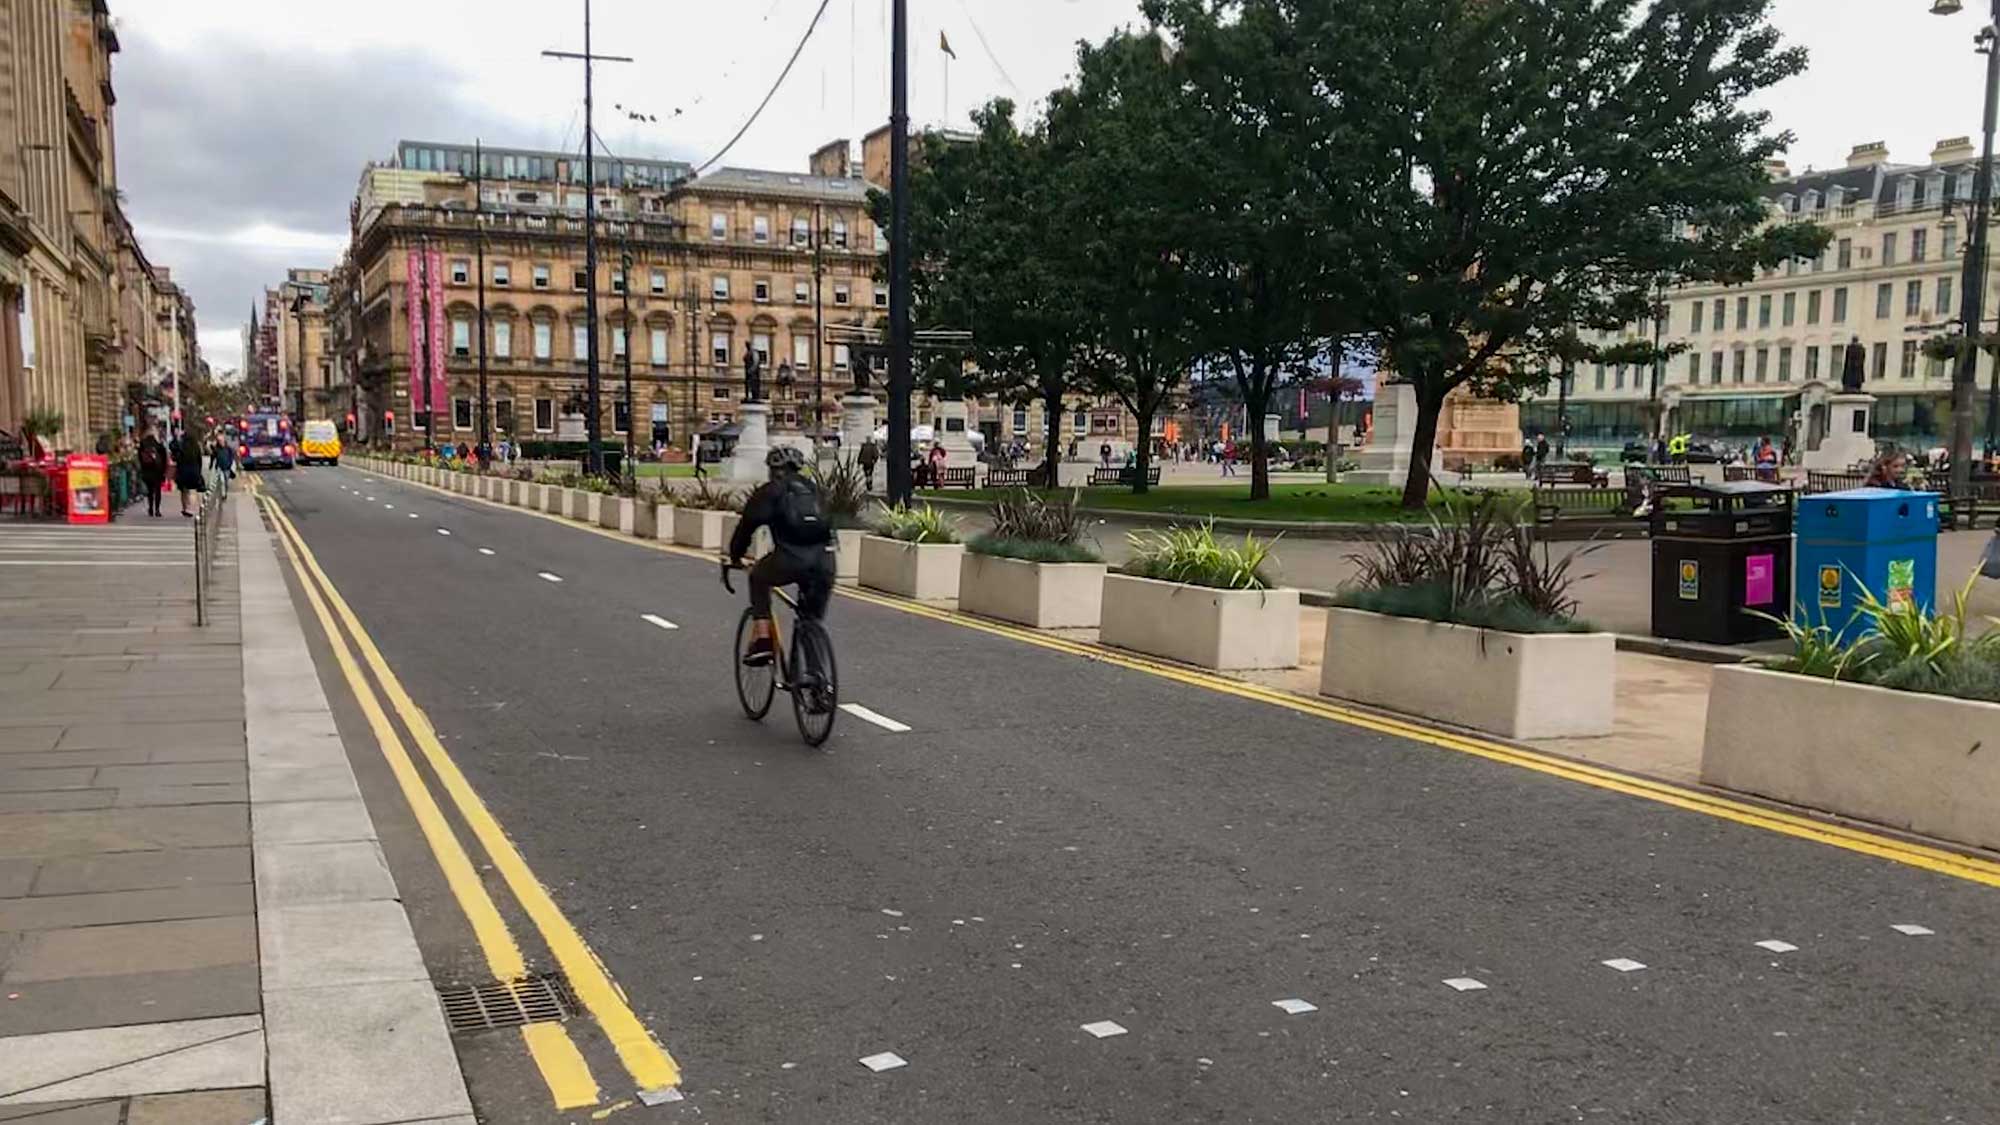 George Square, Glasgow with planter boxes and someone cycling on road